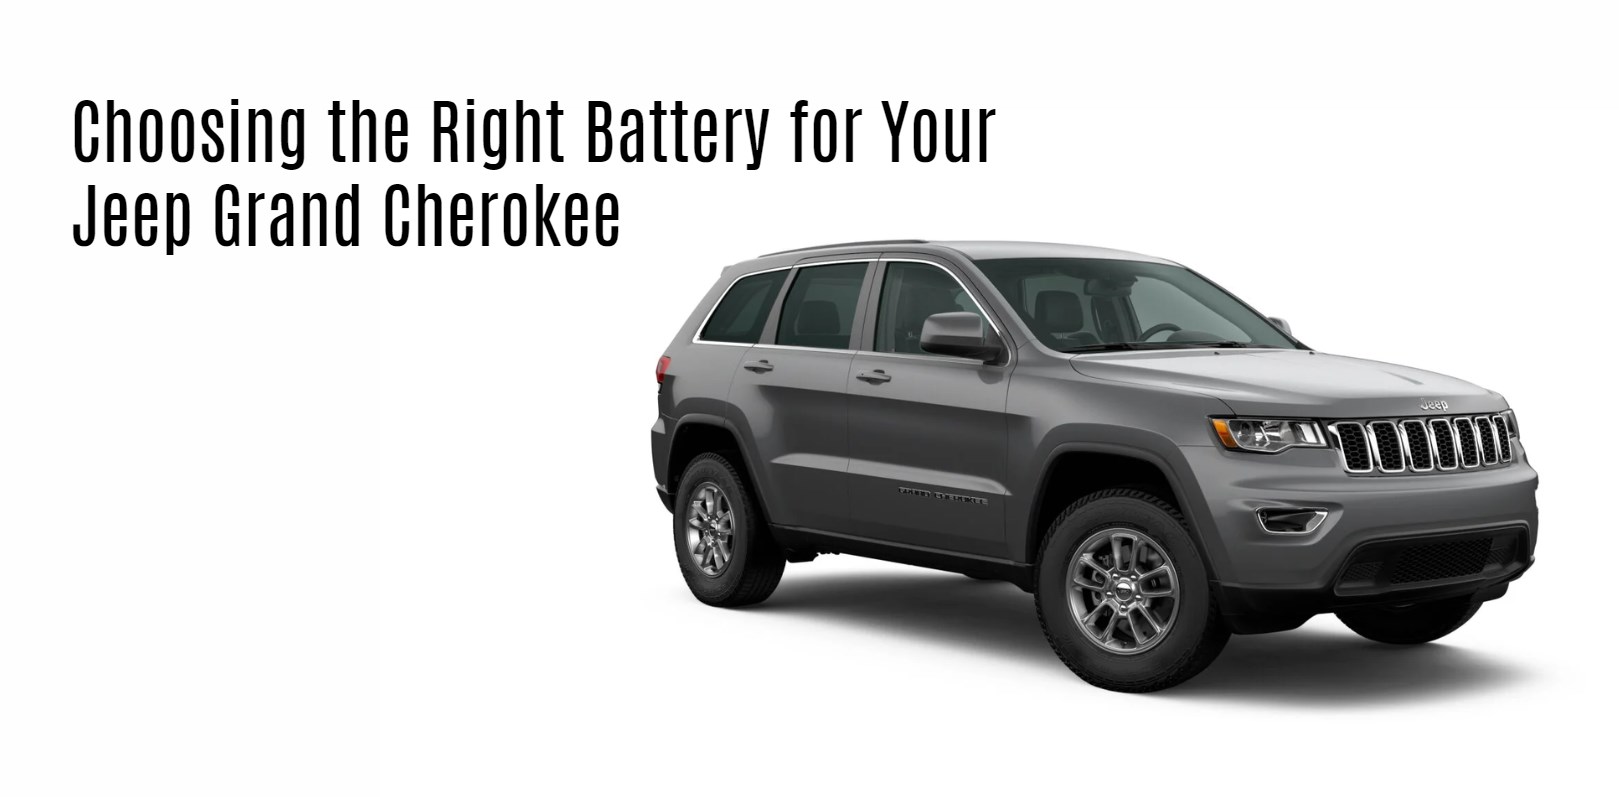 Choosing the Right Battery for Your Jeep Grand Cherokee